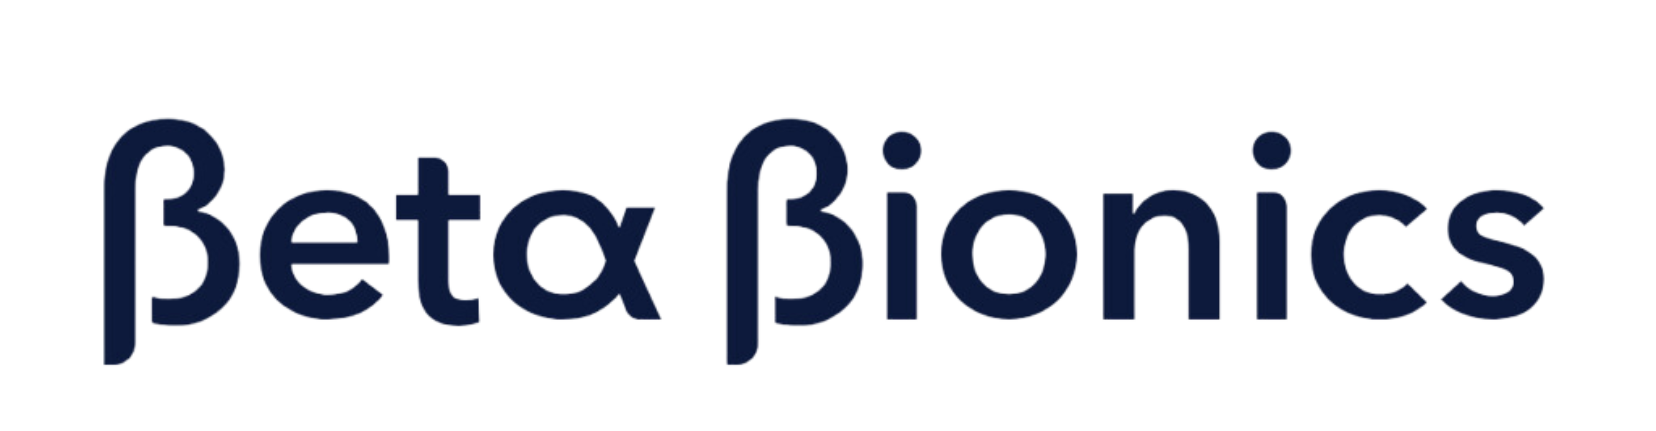 A logo for beta bionics is shown on a white background.